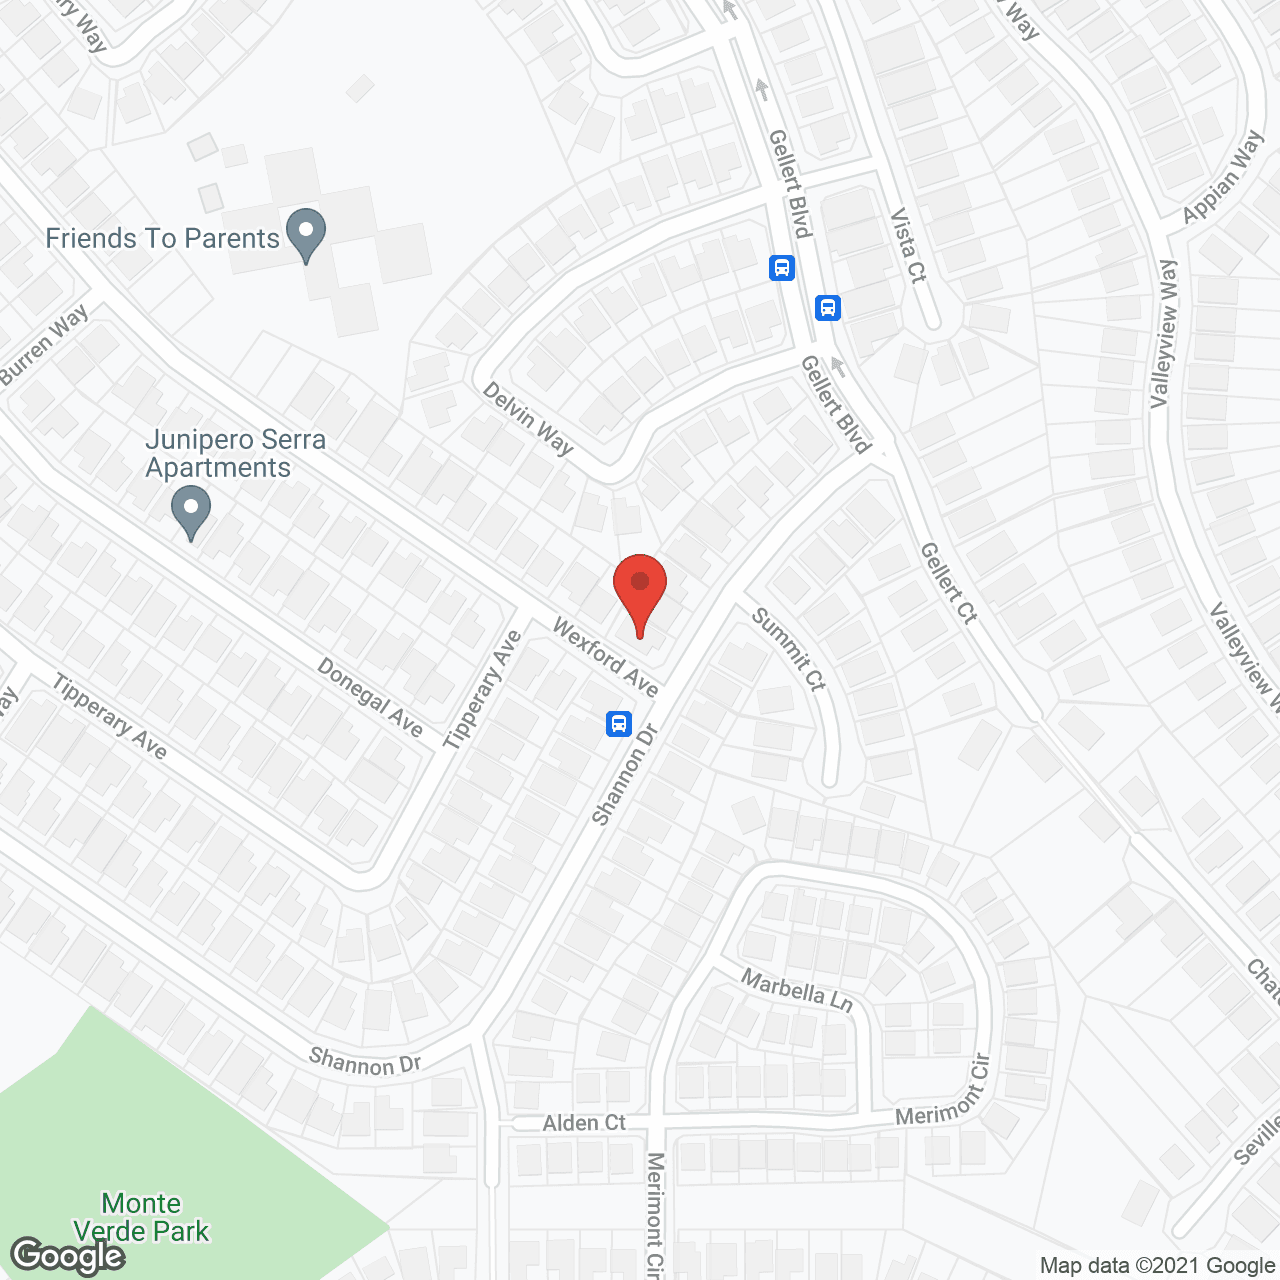 Chad Corner Assisted Living in google map